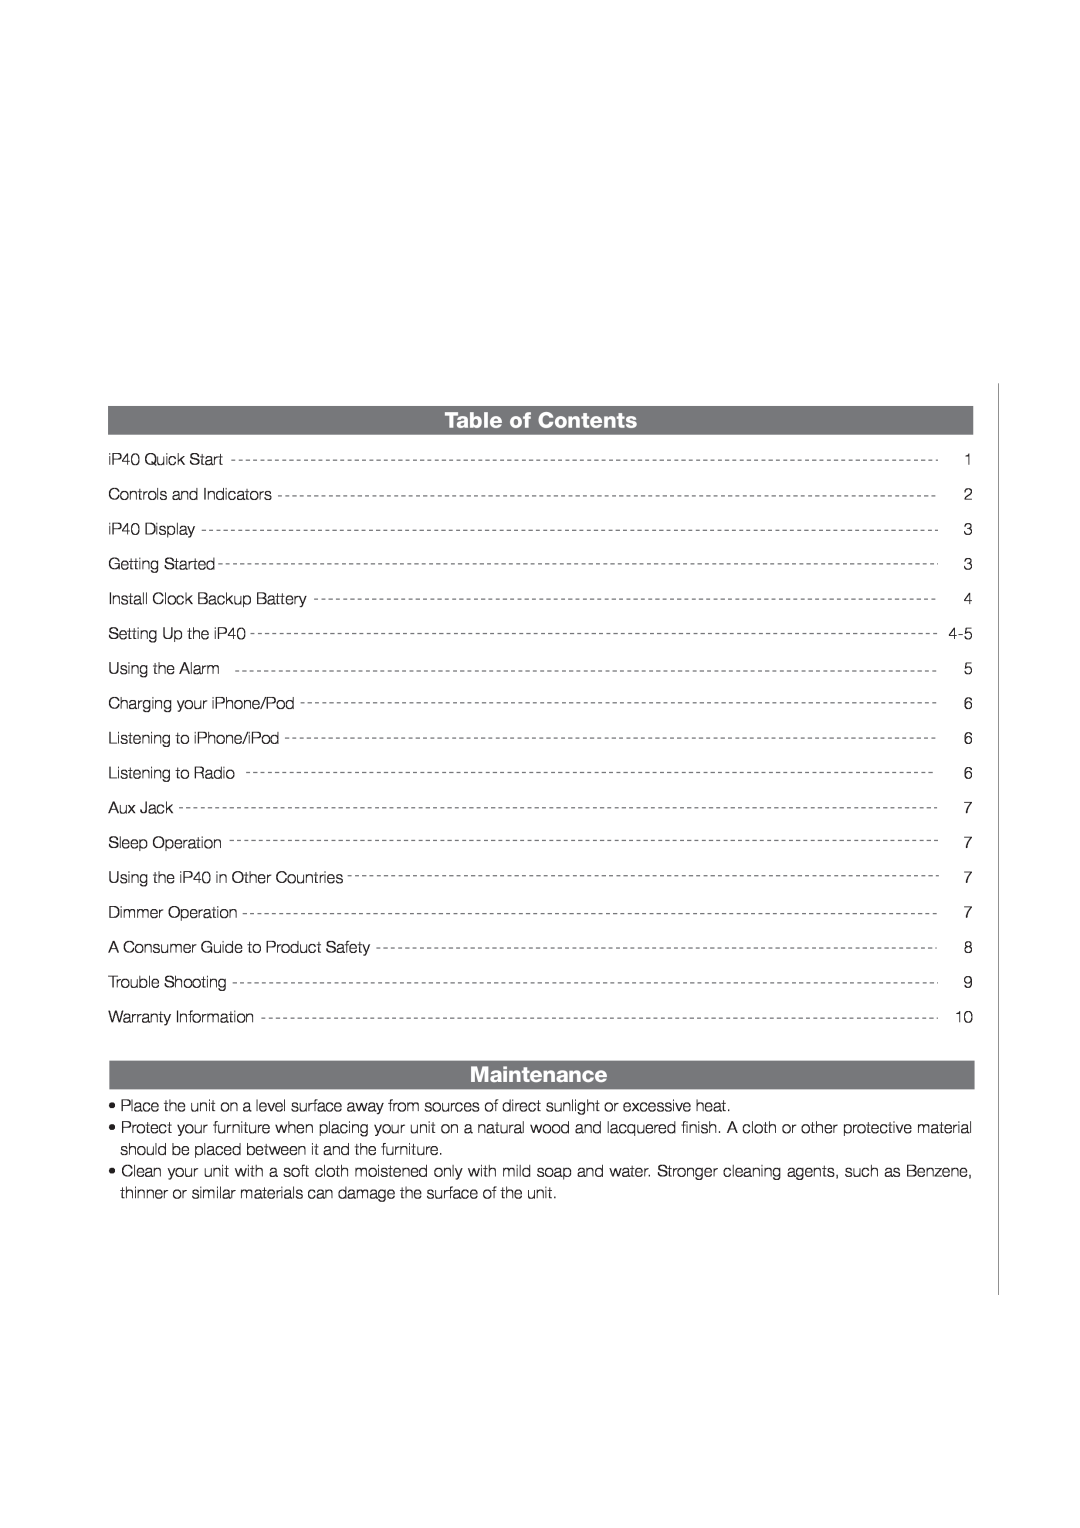 iHome iP40 manual Table of Contents, Maintenance 